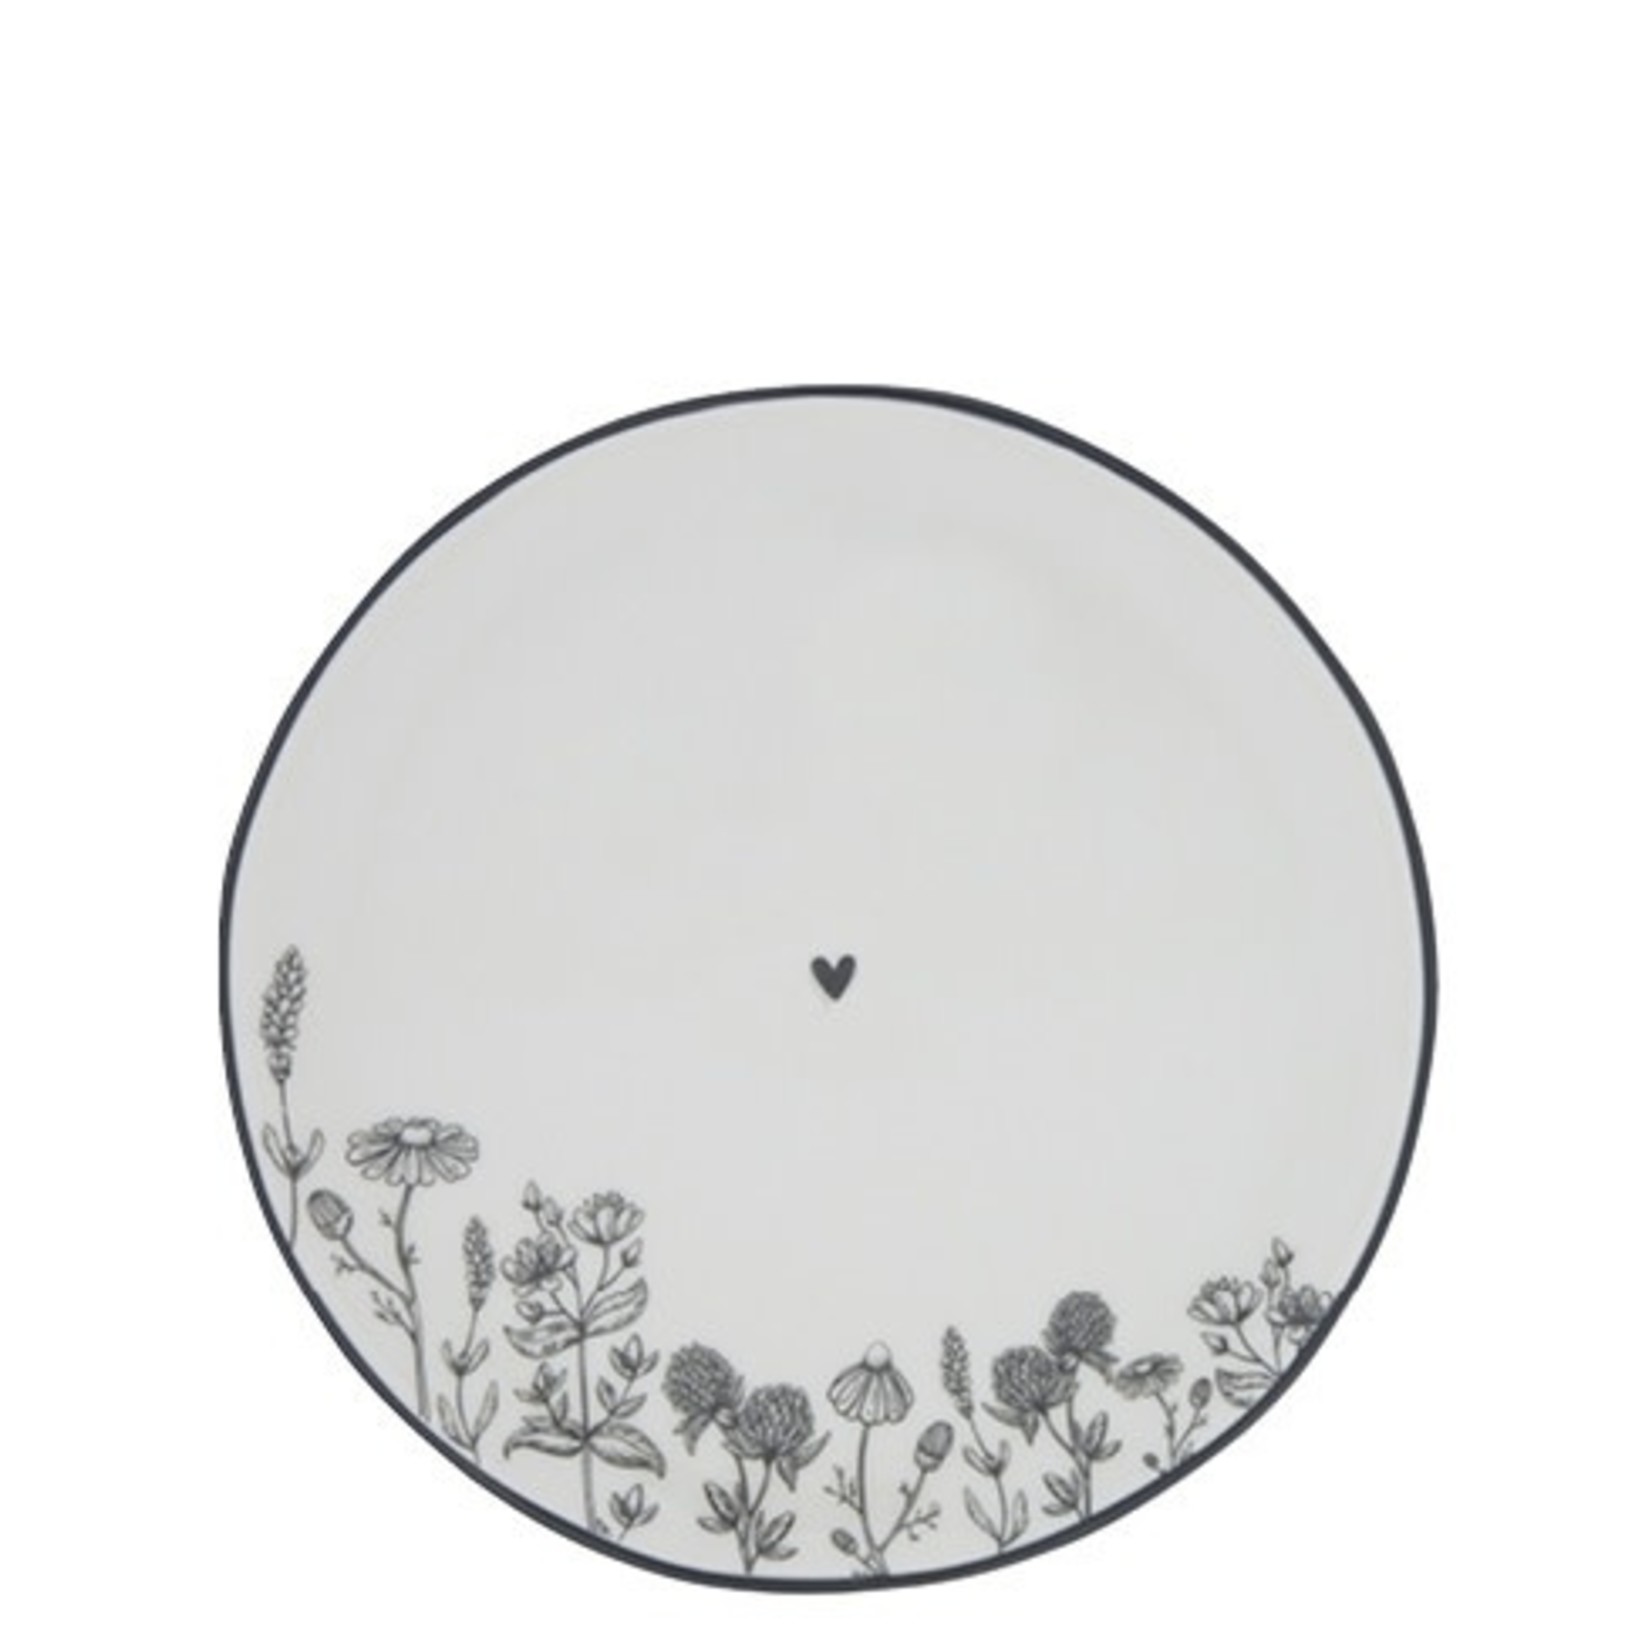 Bastion Collections Dessert Plate Flowers white/black 19 cm